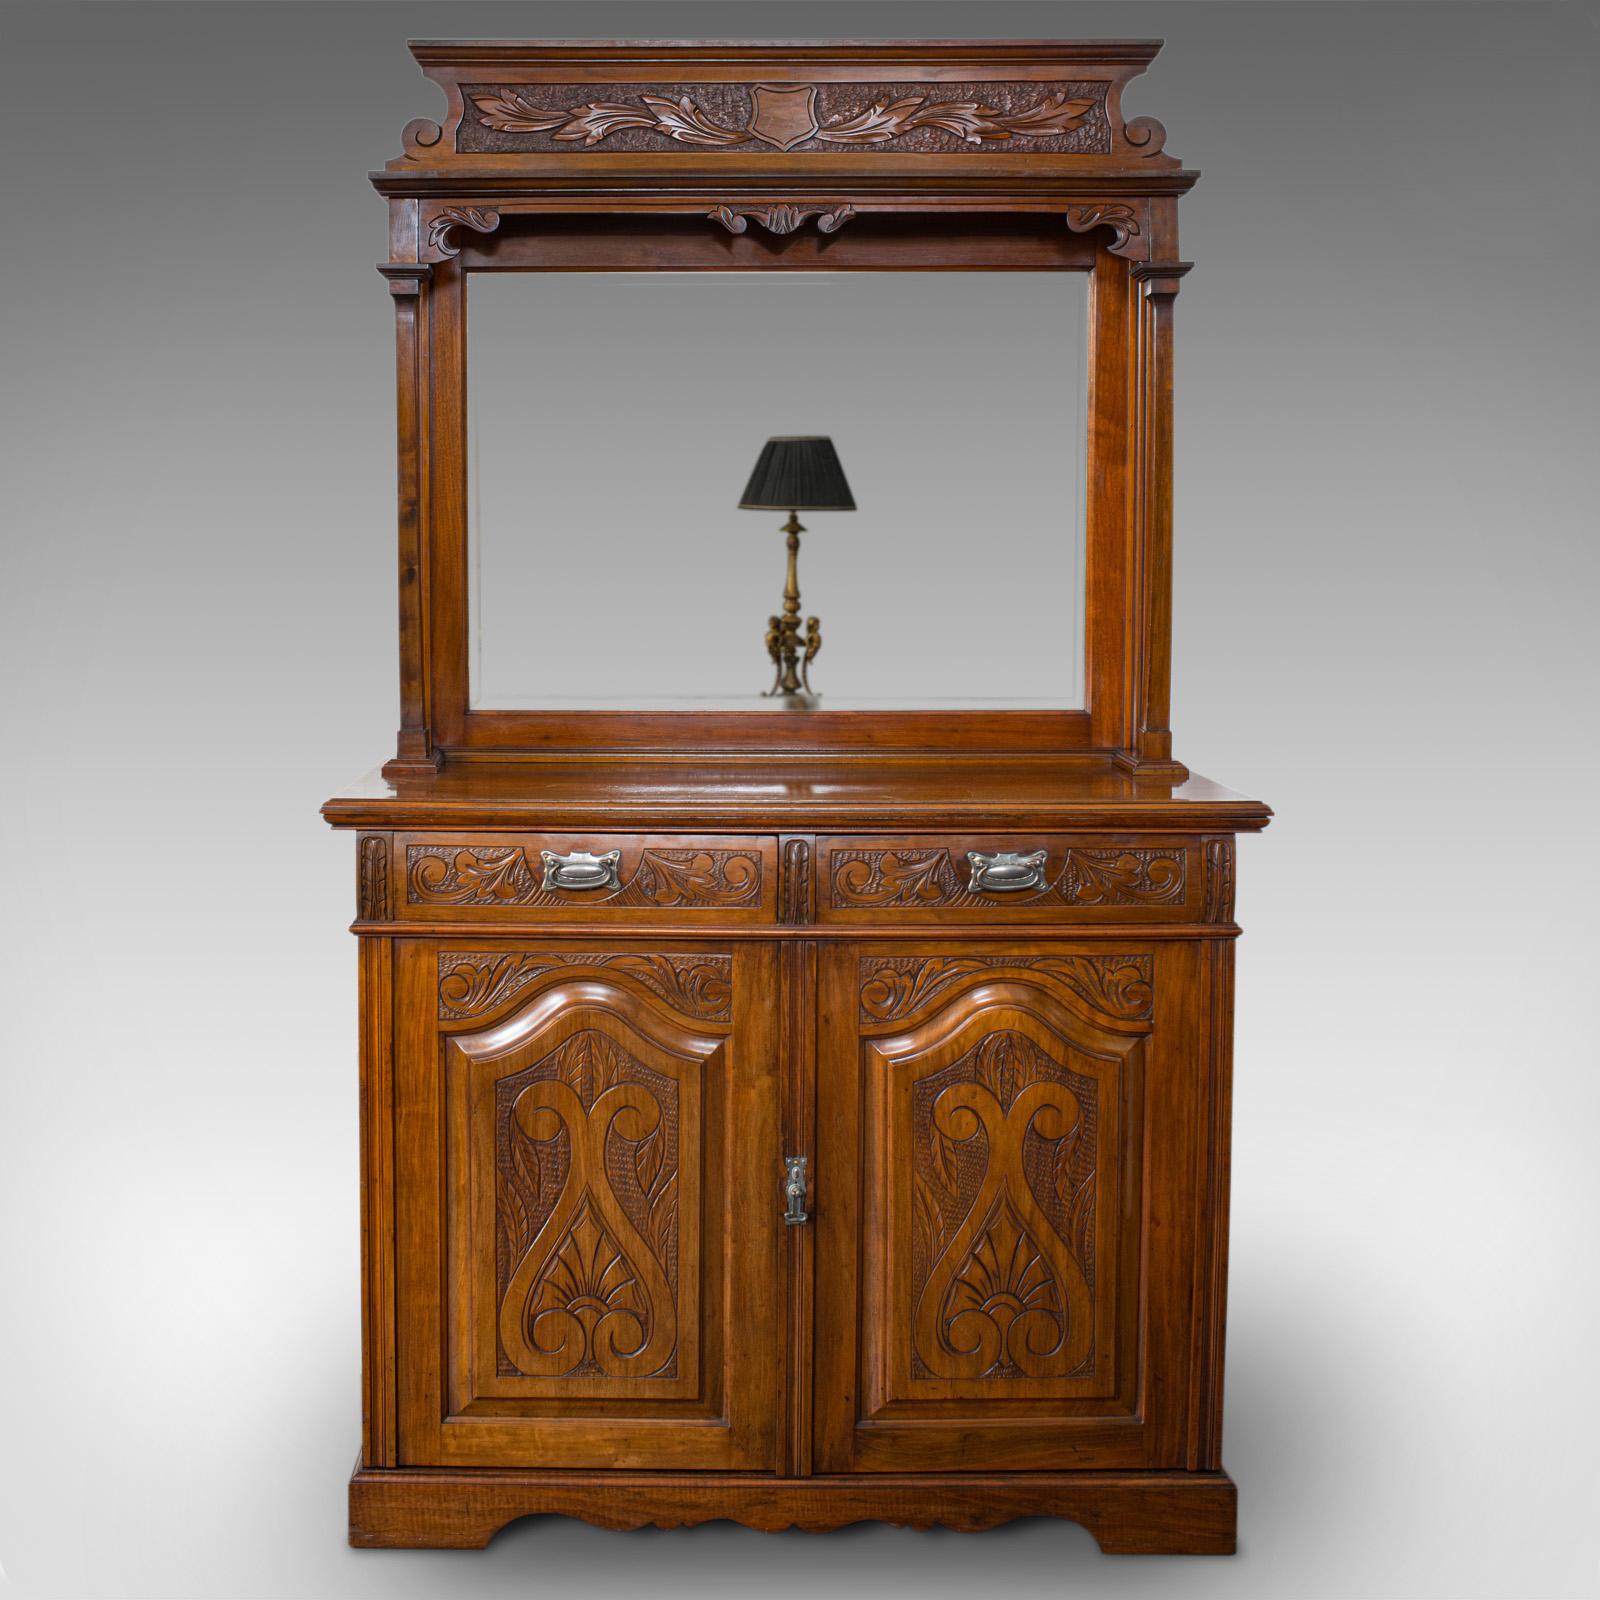 This is a tall vintage dresser. An English, walnut sideboard cabinet in Art Nouveau taste, dating to the late 20th century, circa 1980.

Generously sized with Art Nouveau overtones
Displays a desirable aged patina
Select walnut shows fine grain